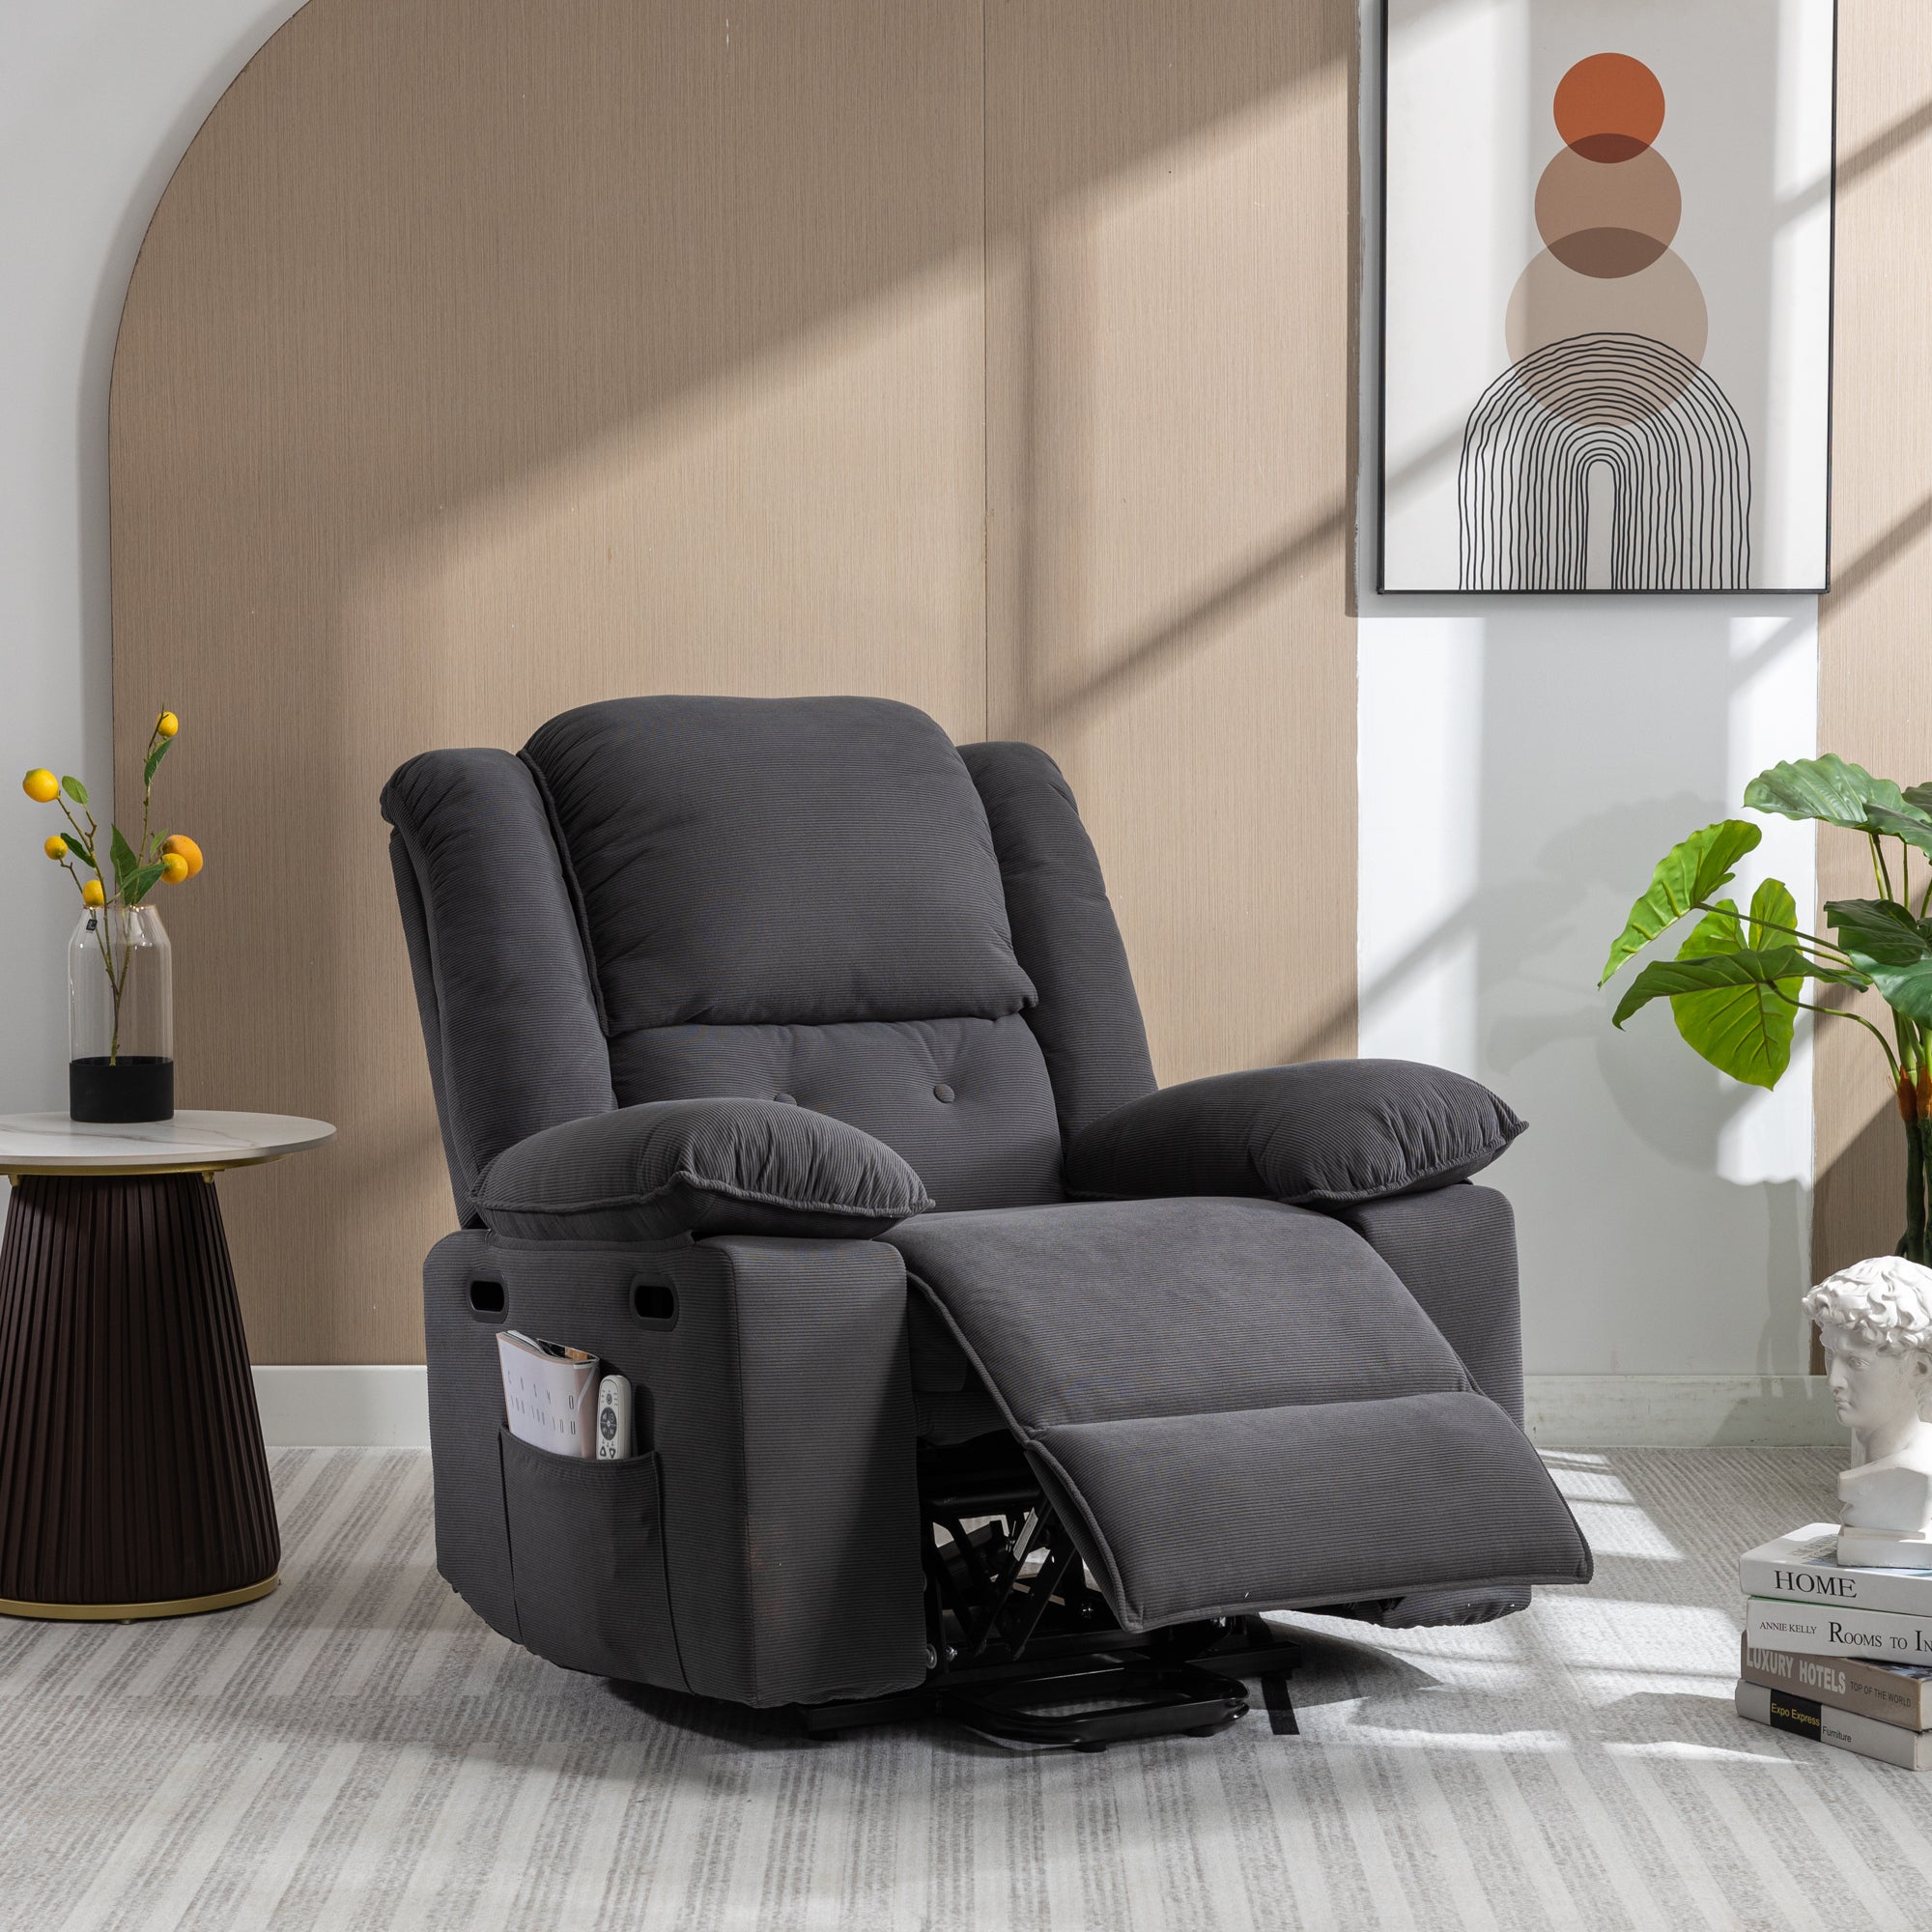 Gray Power Lift Chair Recliner, extended footrest